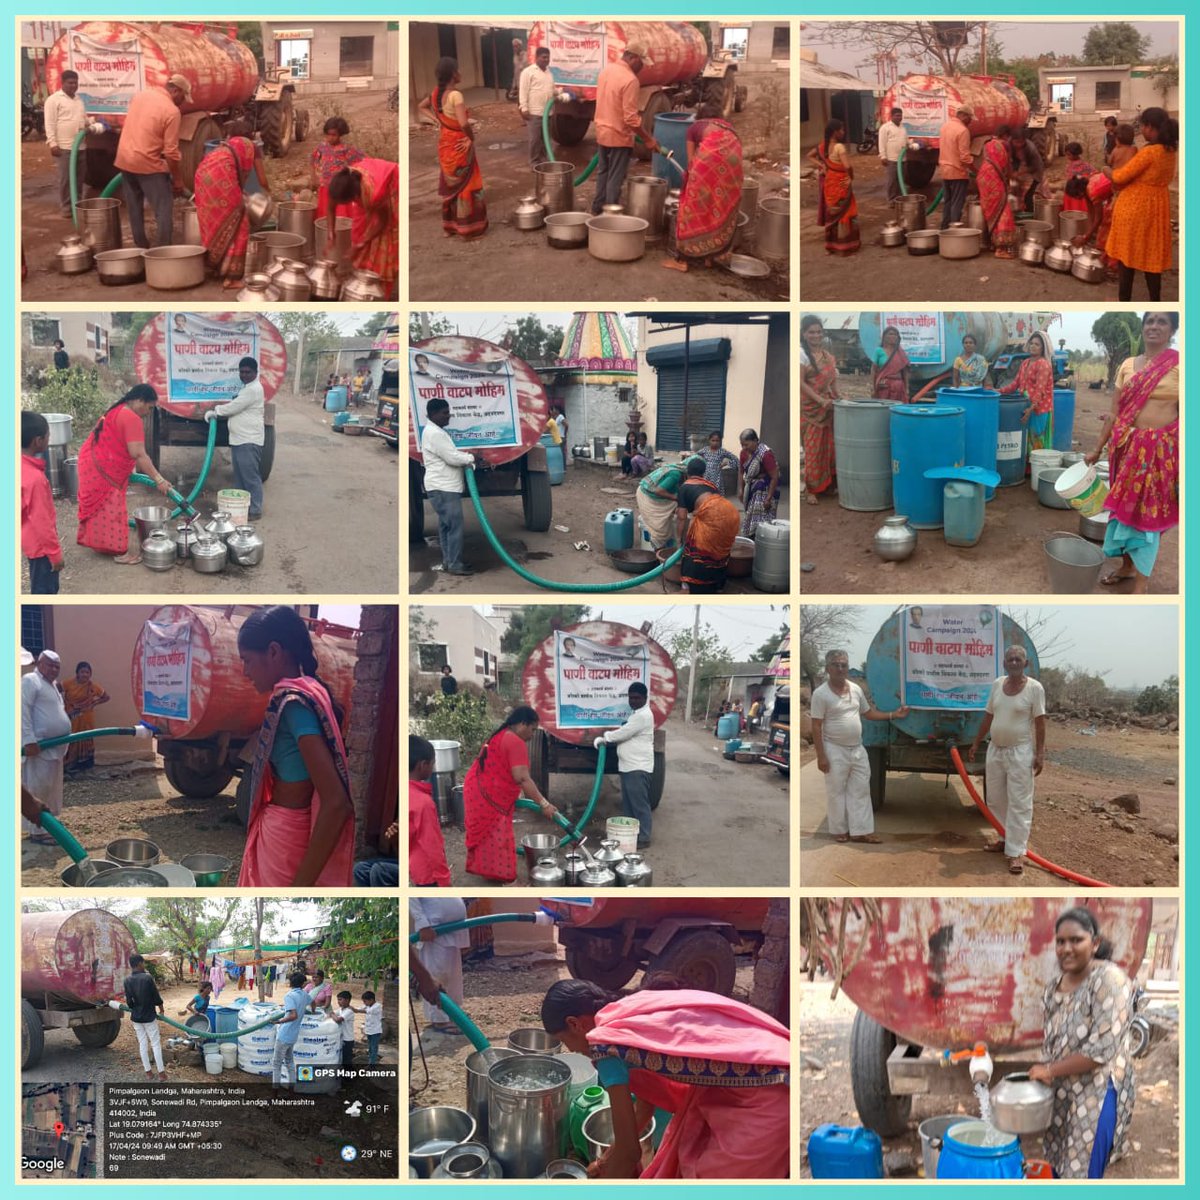 #Missonreachout #DroughtOutreach  #everydropcounts 

4,73,000 liters of drinking water has been distributed in 10 villages till date.

@Bennet76422878 @marycrasto